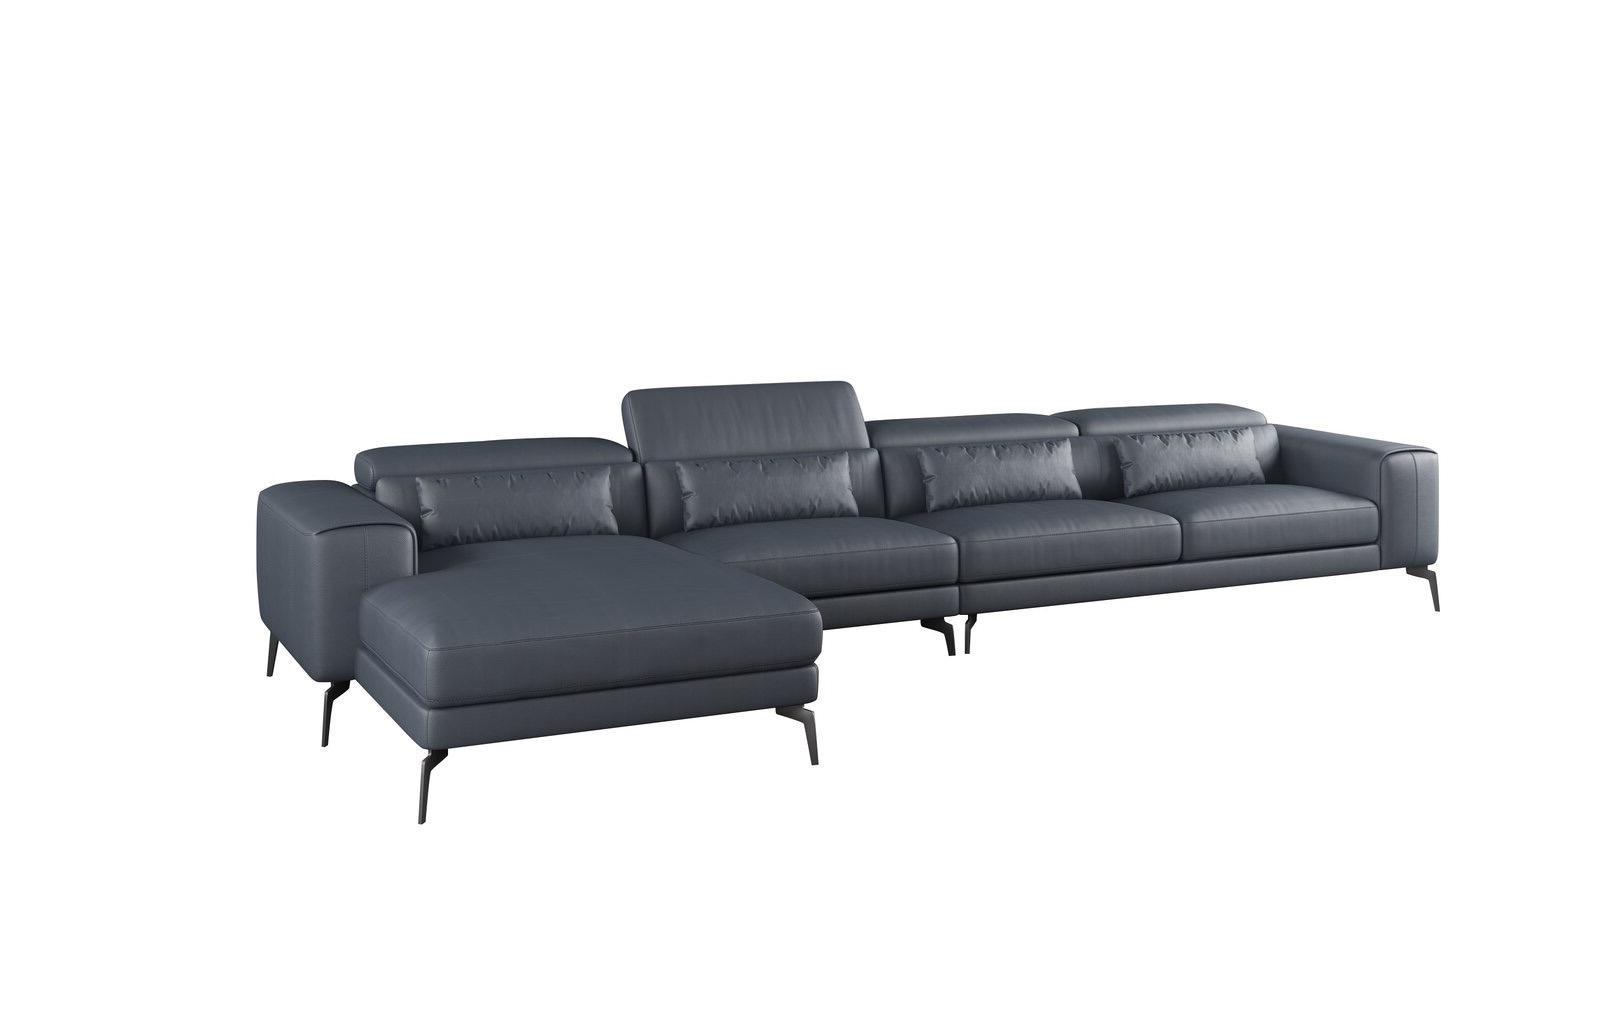 Contemporary, Modern Sectional Sofa CAVOUR EF-12554L-4LHF in Smoke, Gray Leather